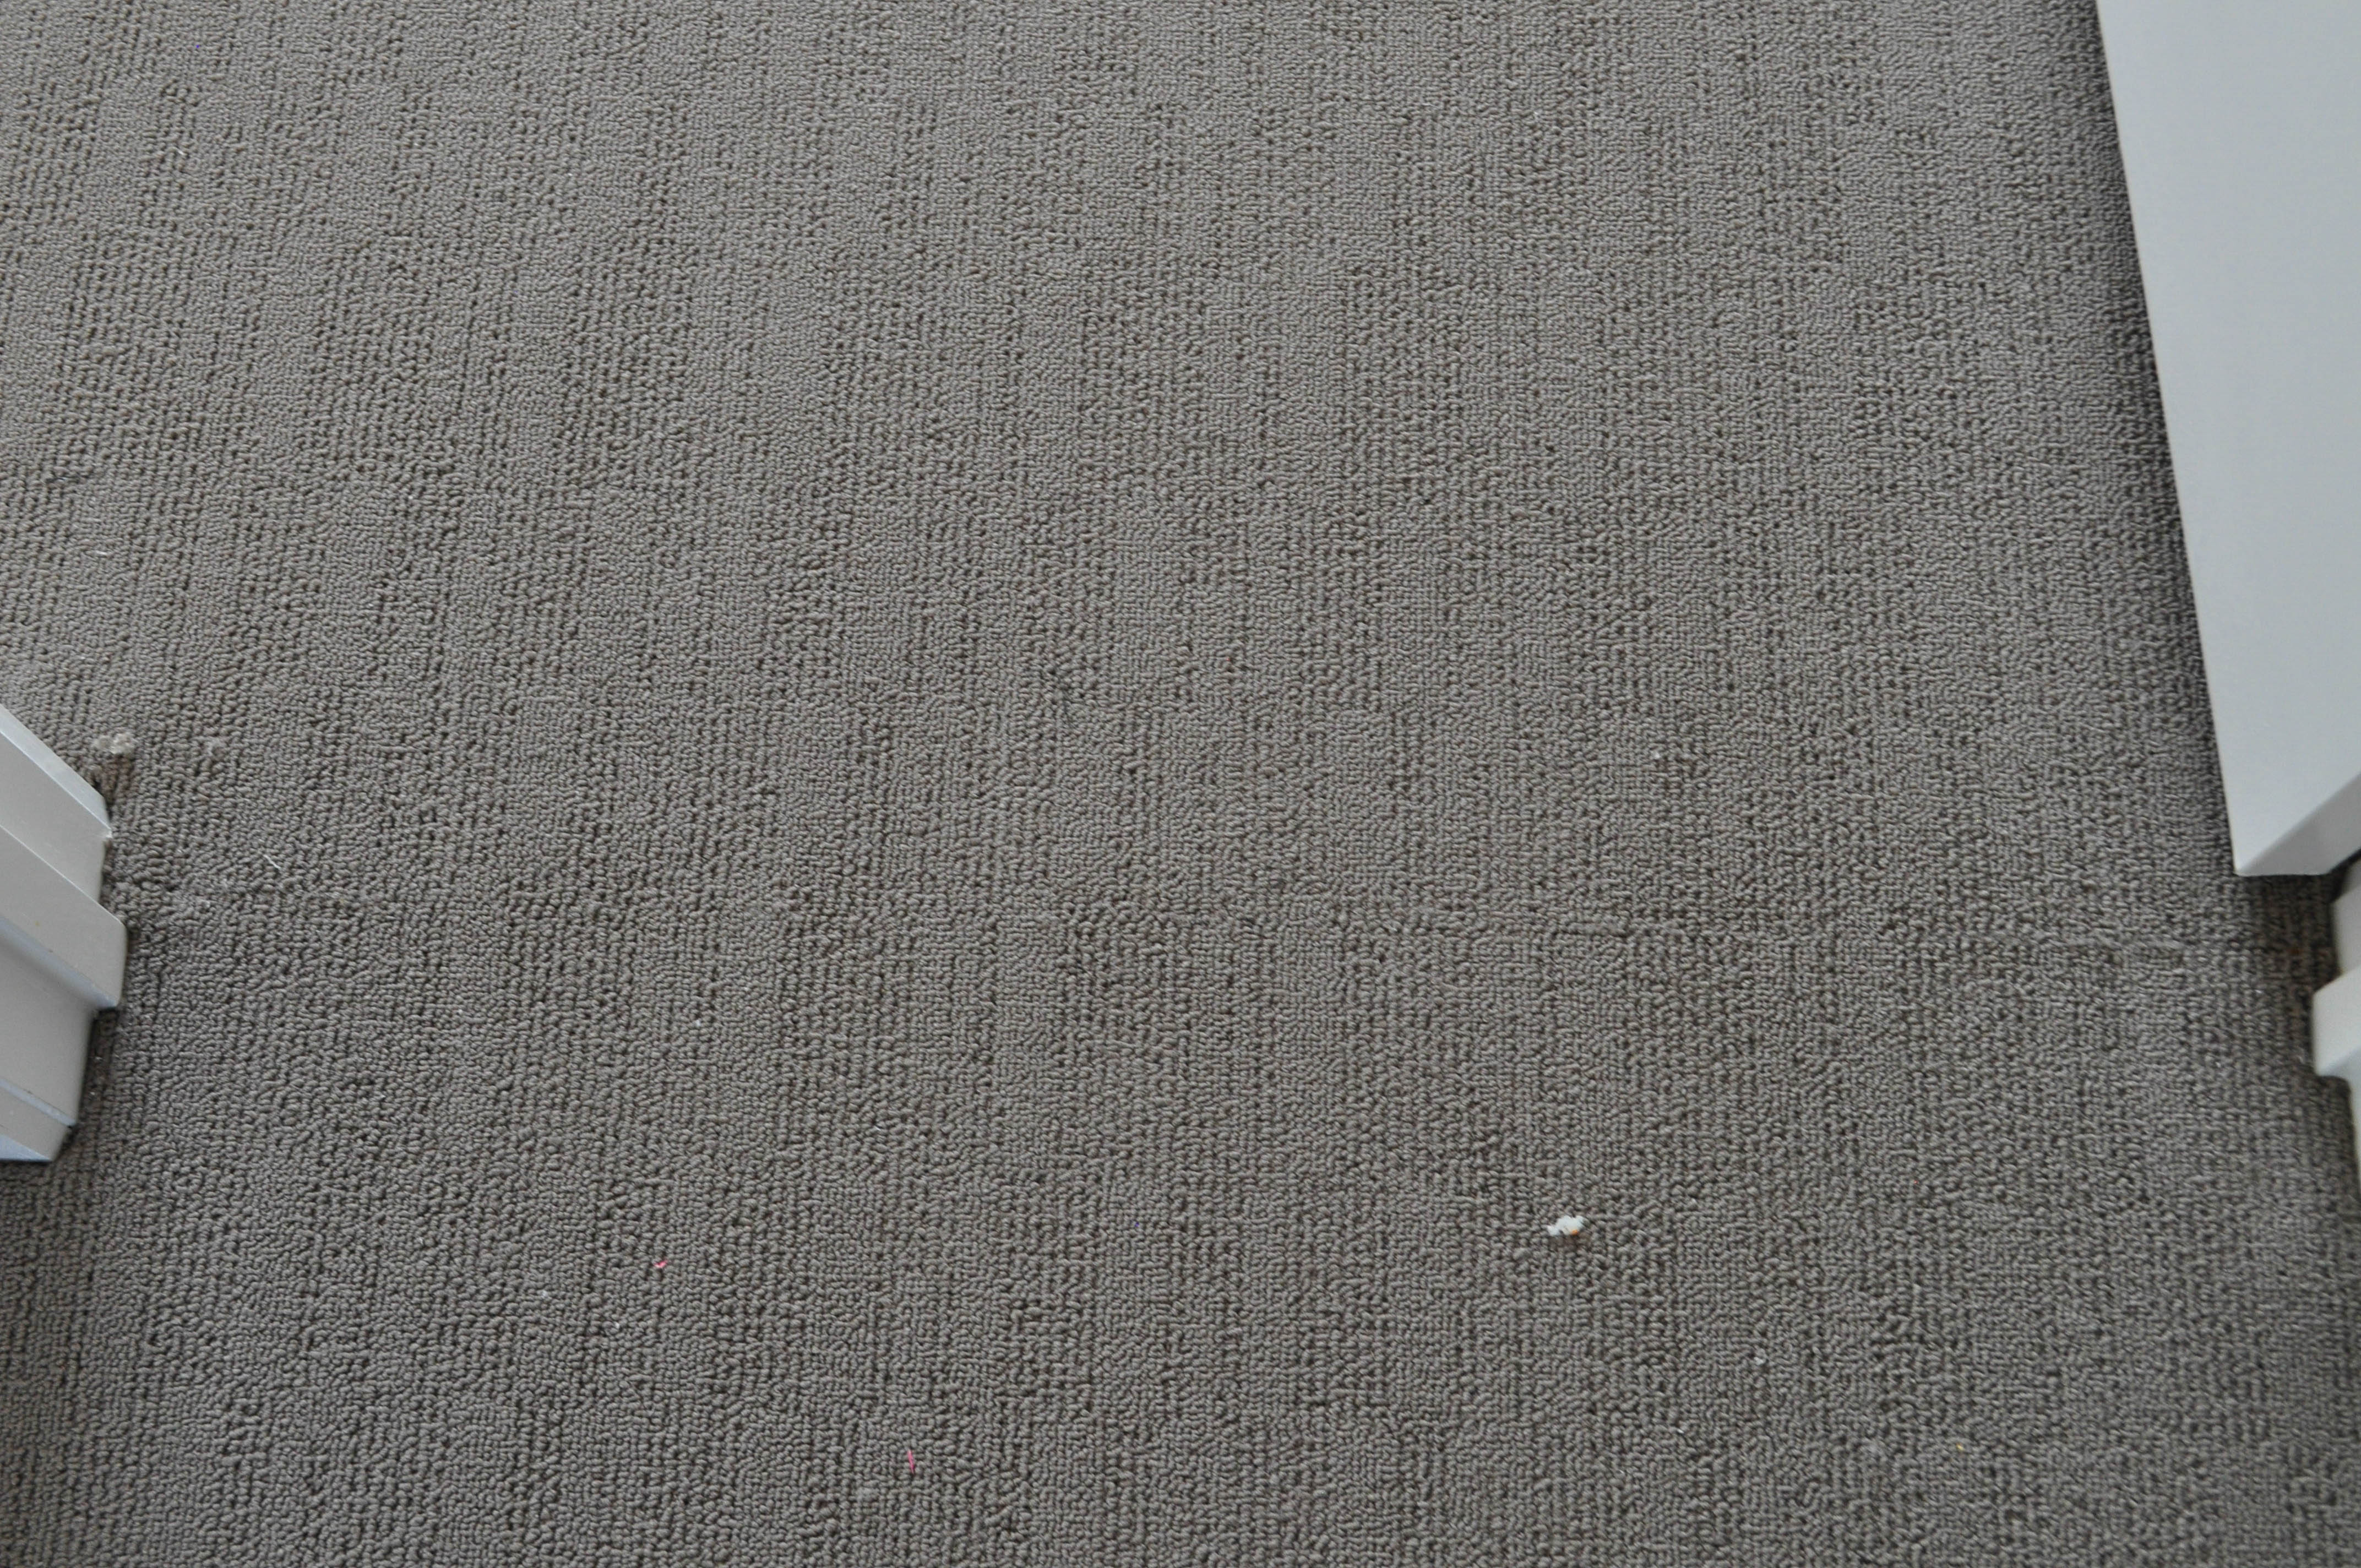 2 bodies of carpet have been joined in the doorway between the two rooms and the carpet has been pattern-matched lengthwise and sidewise.